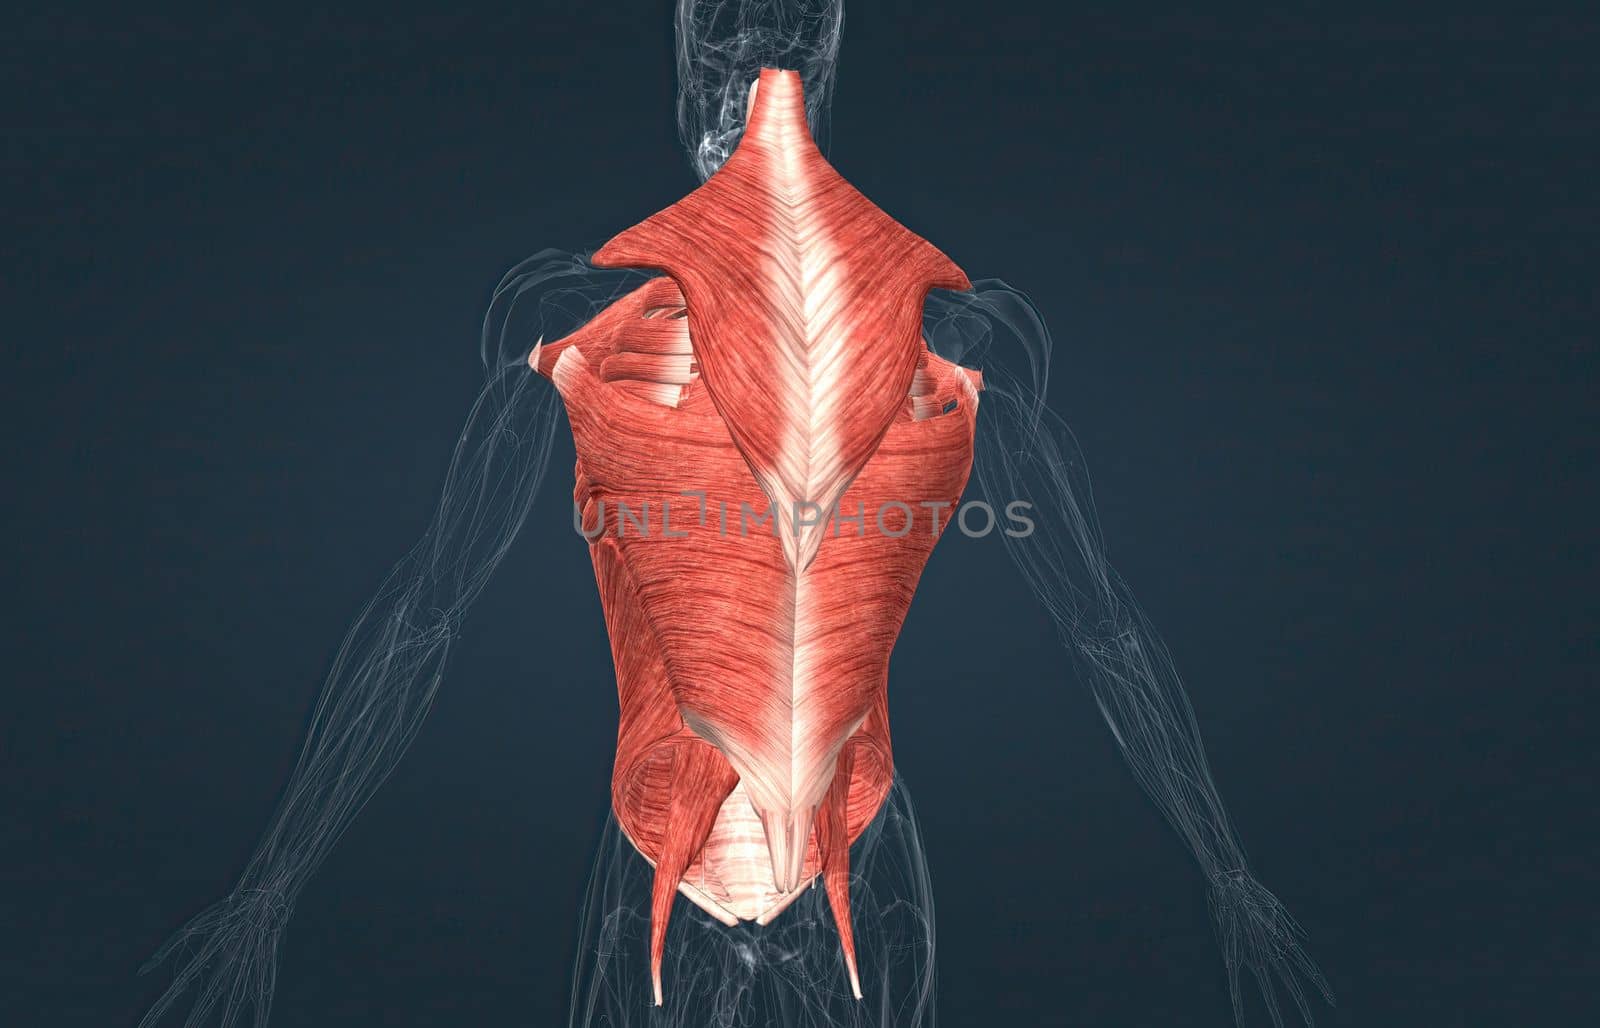 The muscles of the trunk include those that move the vertebral column, the muscles that form the thoracic and abdominal walls, and those that cover the pelvic outlet 3D illustration